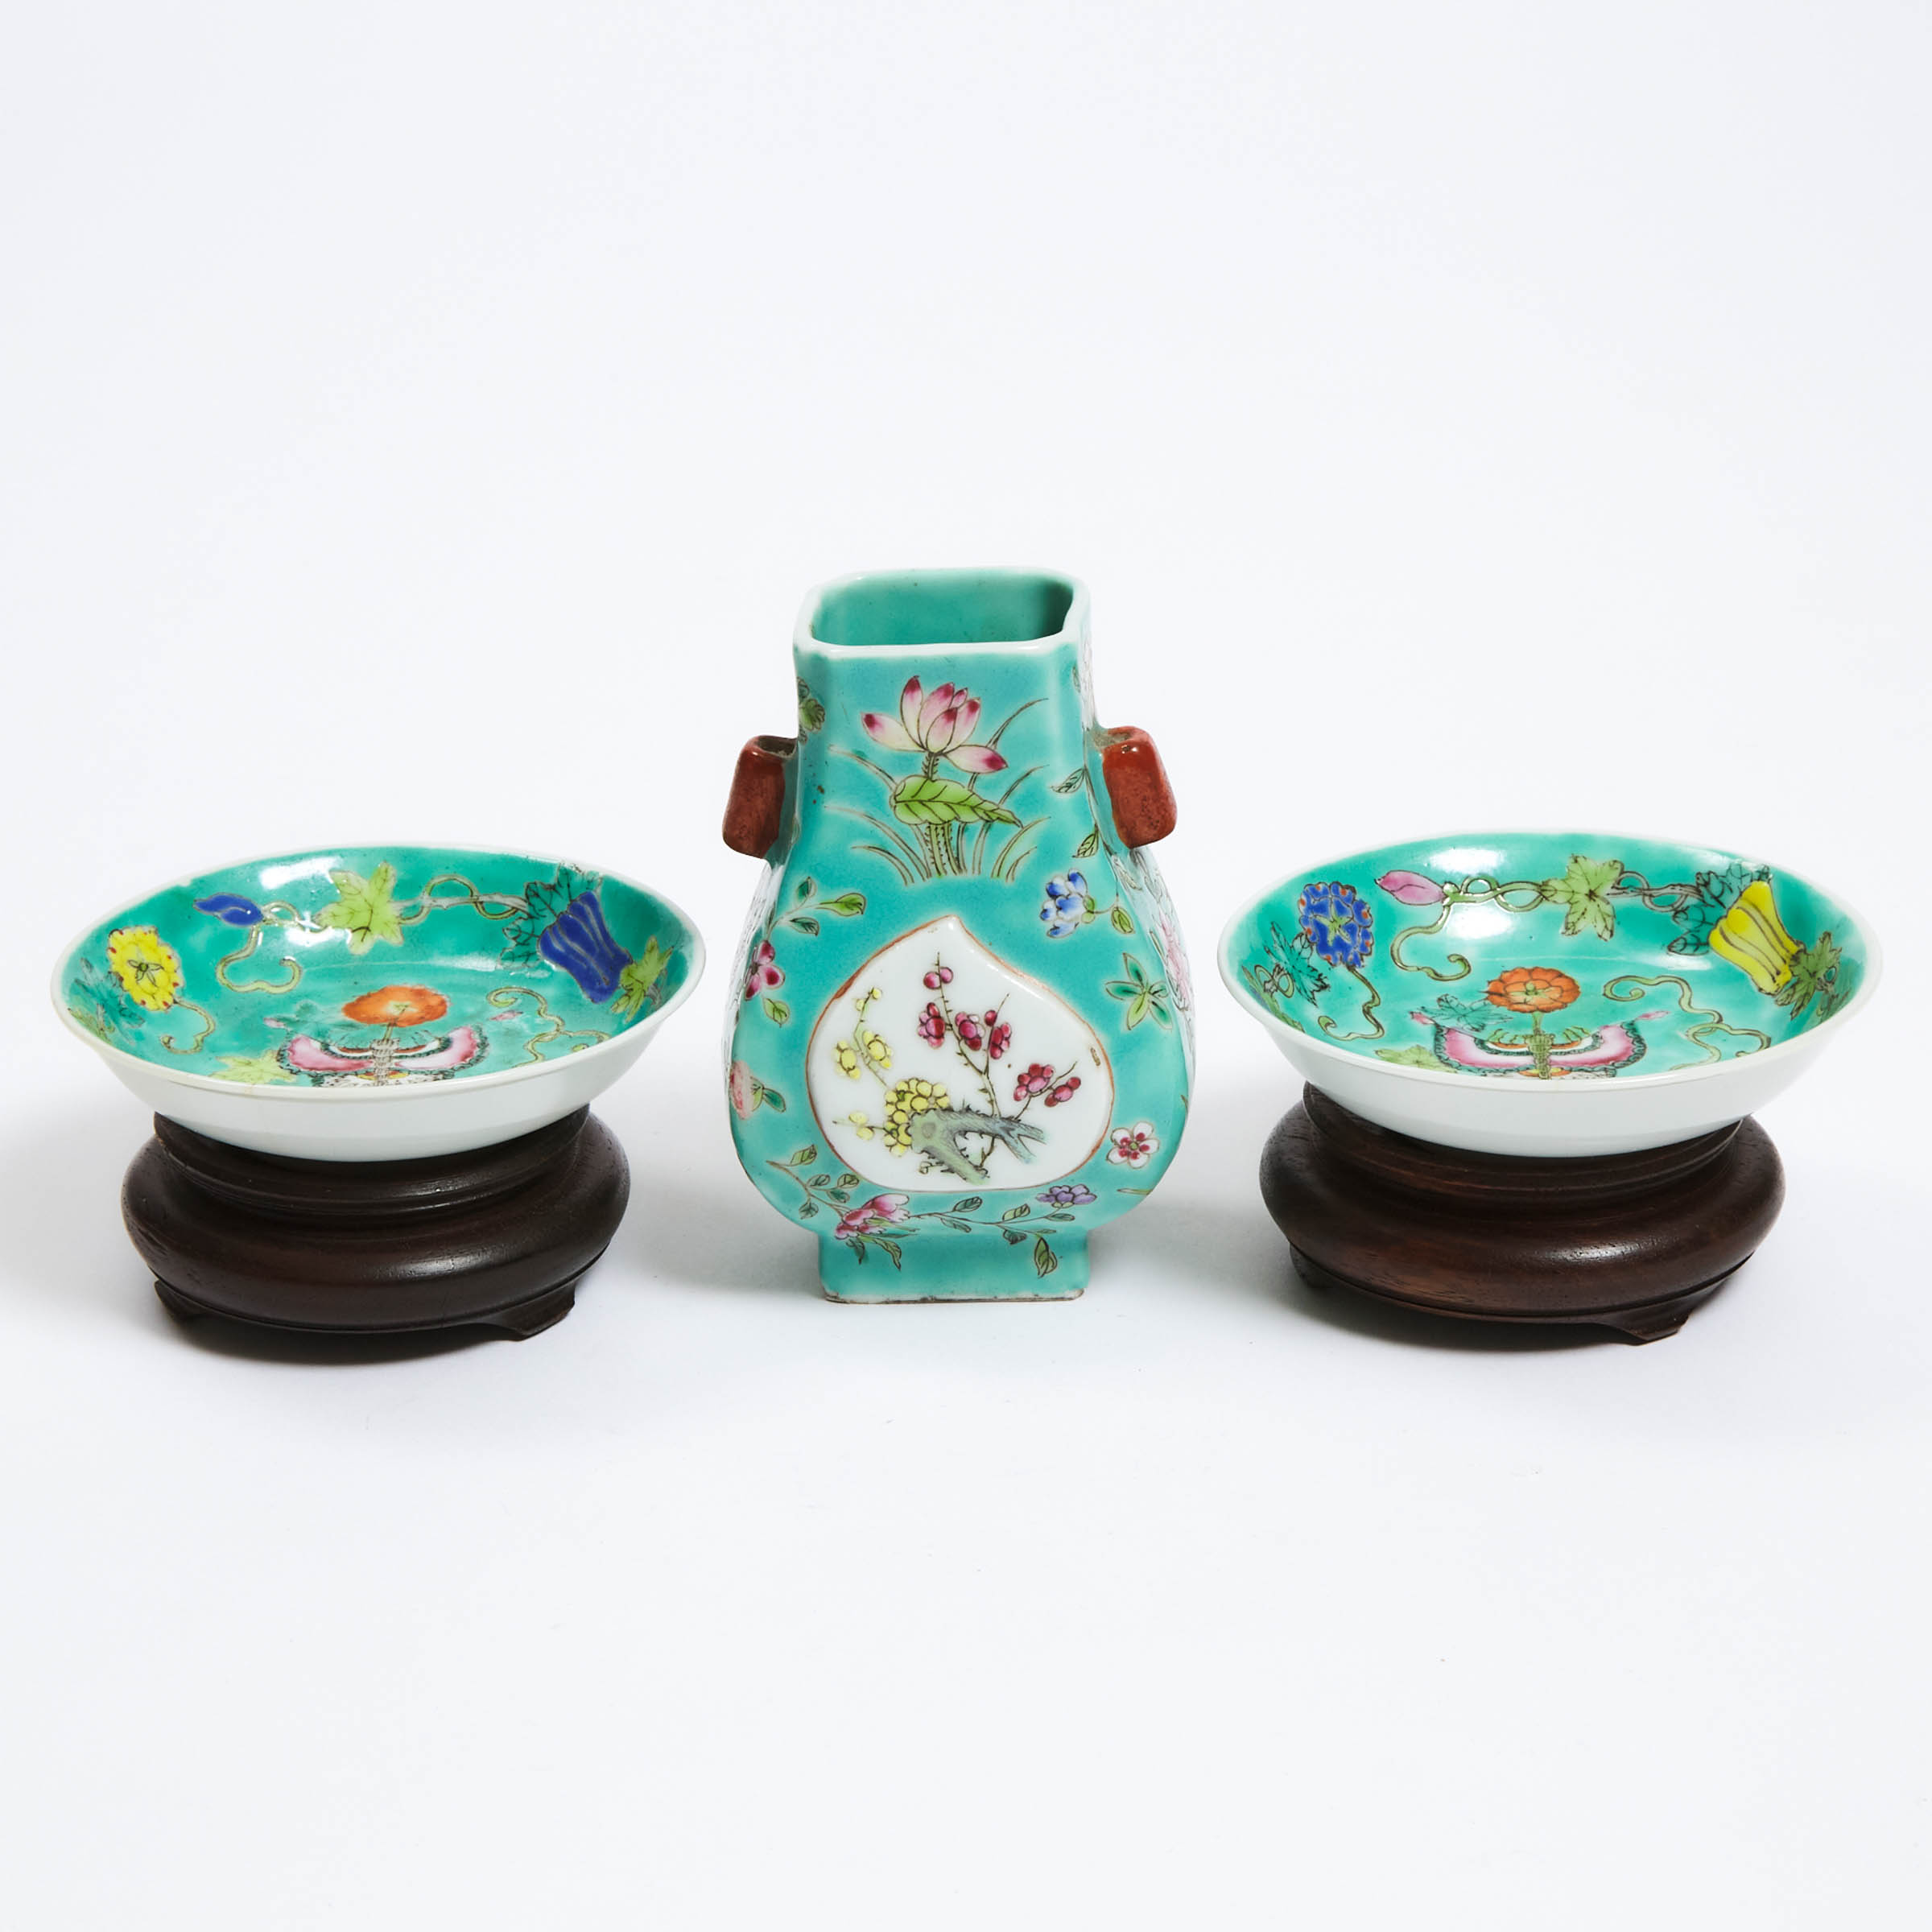 Two Small Turquoise Ground Dishes, Together With a Hu-Form Vase, Late Qing Dynasty